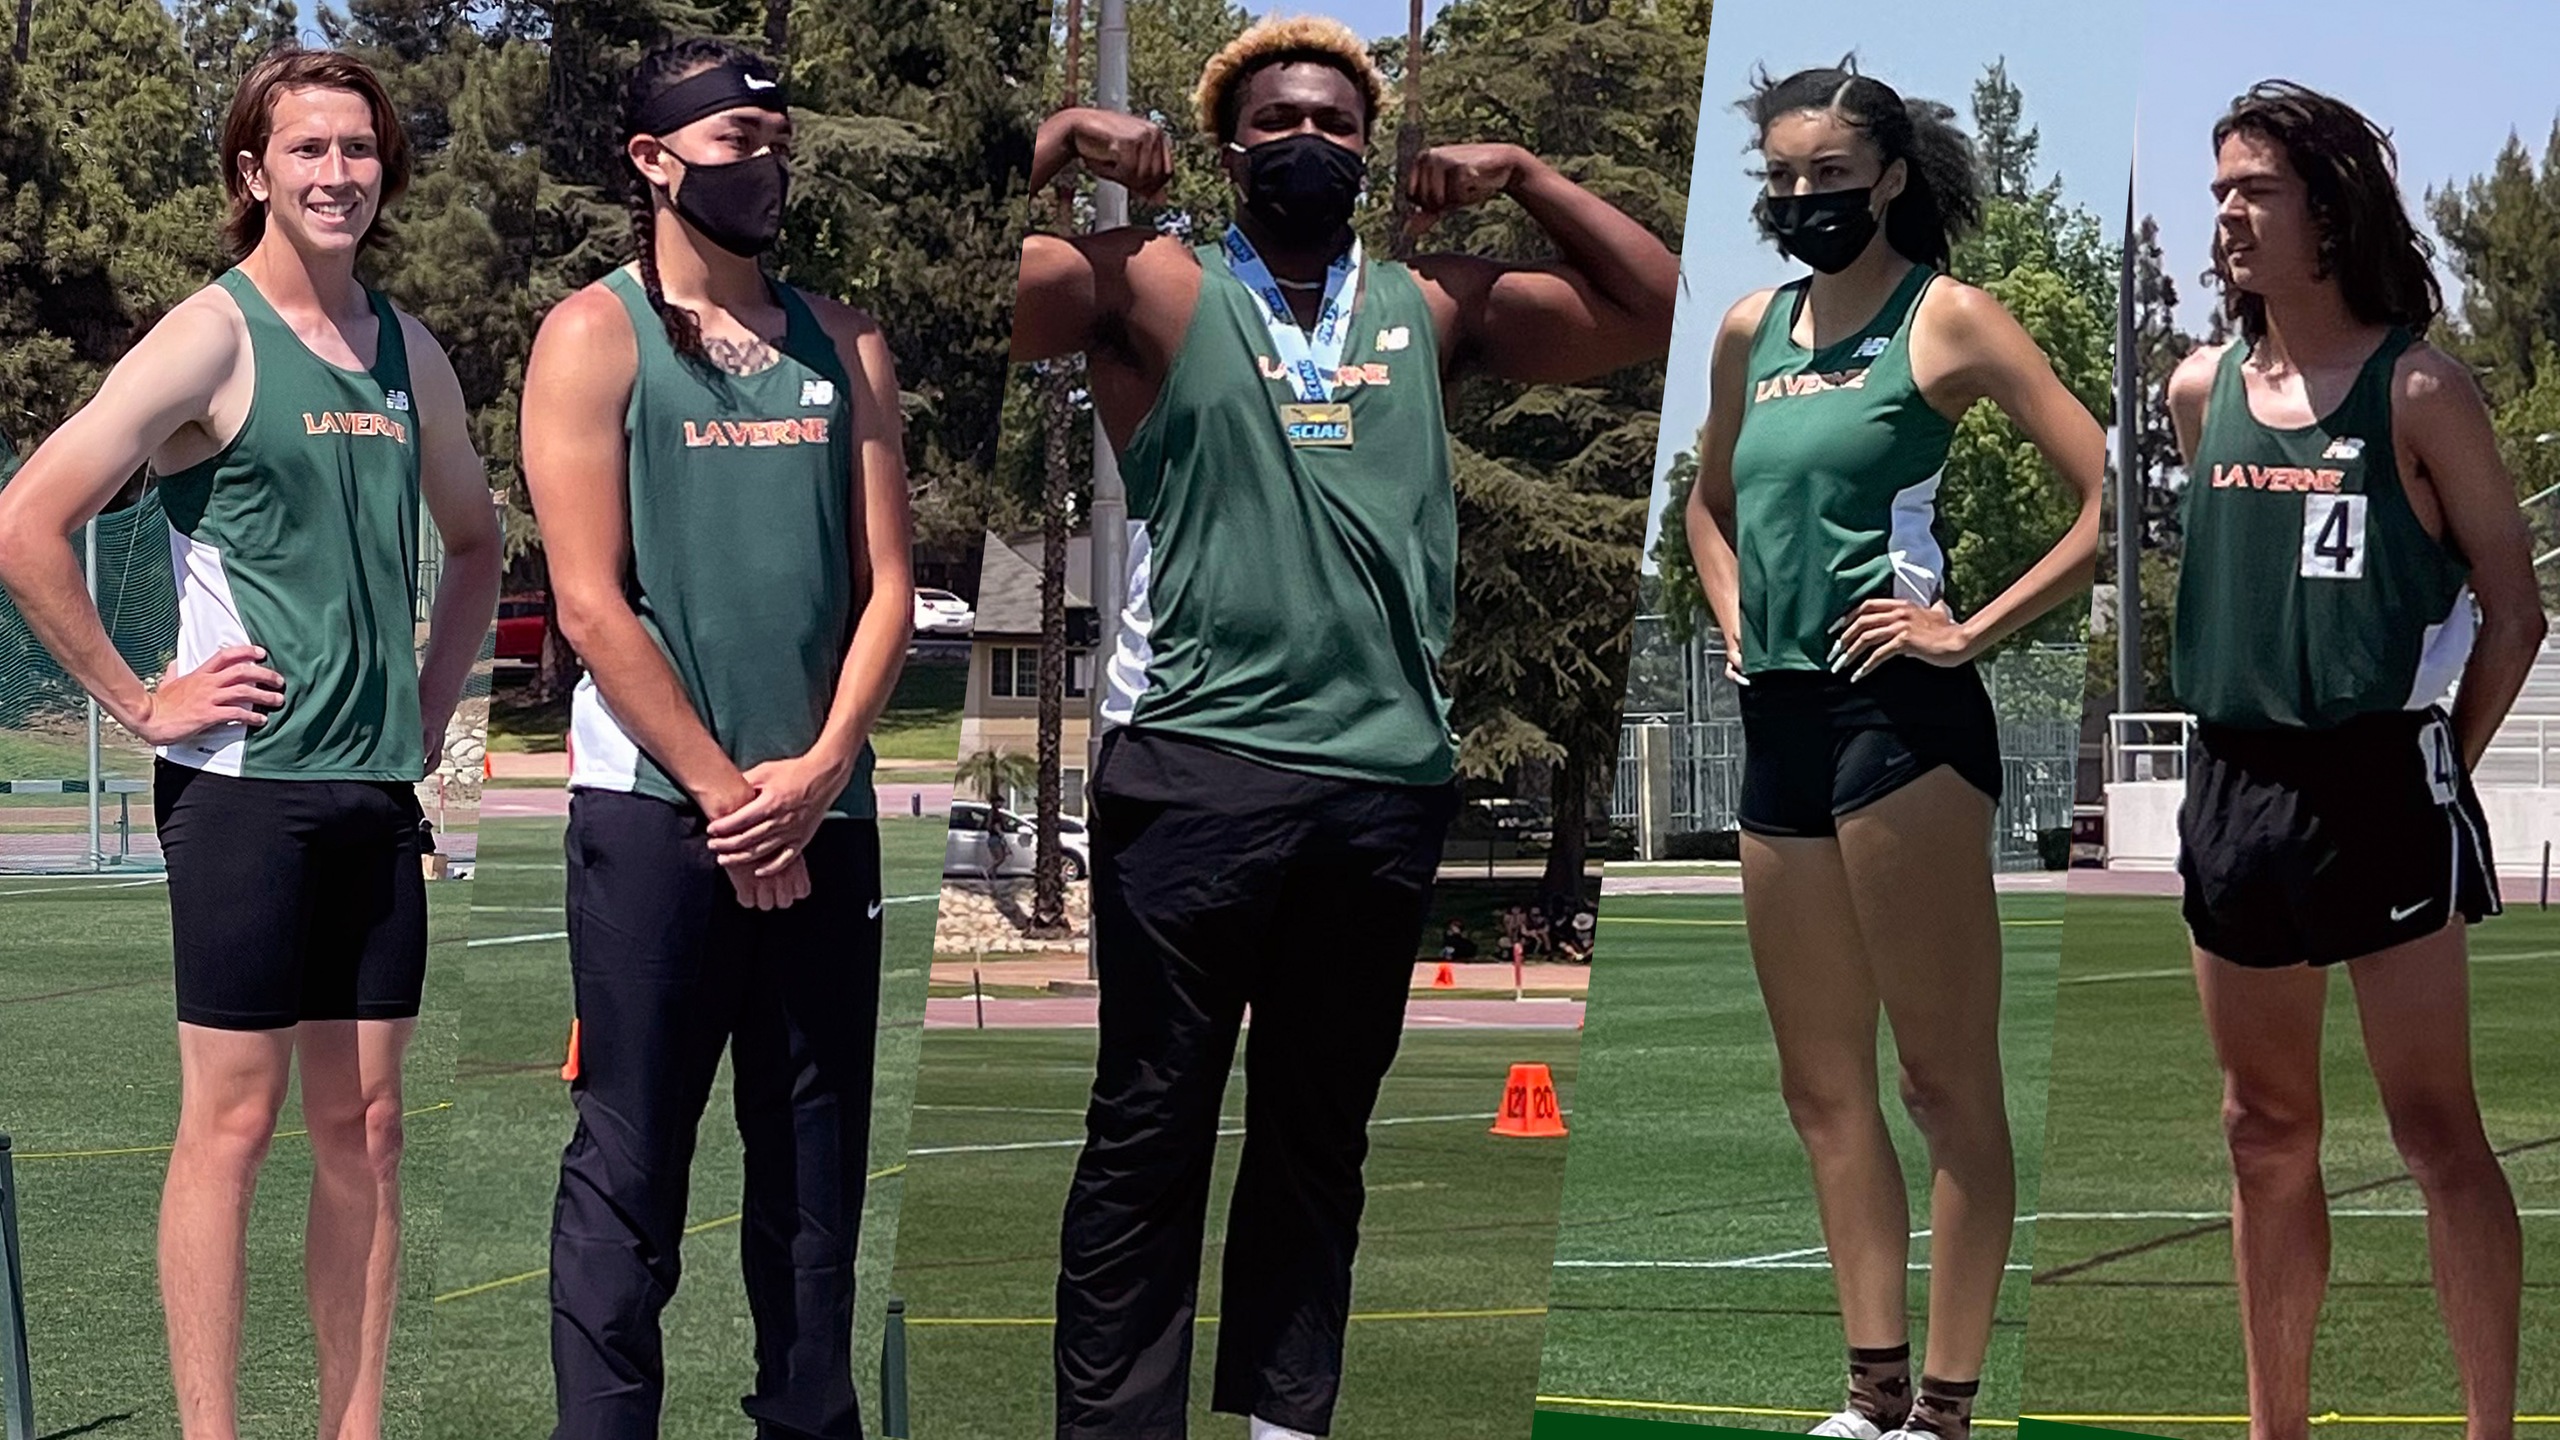 Subdue Ezinwa (center) won the SCIAC Championship in the discus. Zachary Reid,  Dominic Flores, Olivia Magby, and Michael Sahagun each earned runner-up finishes.